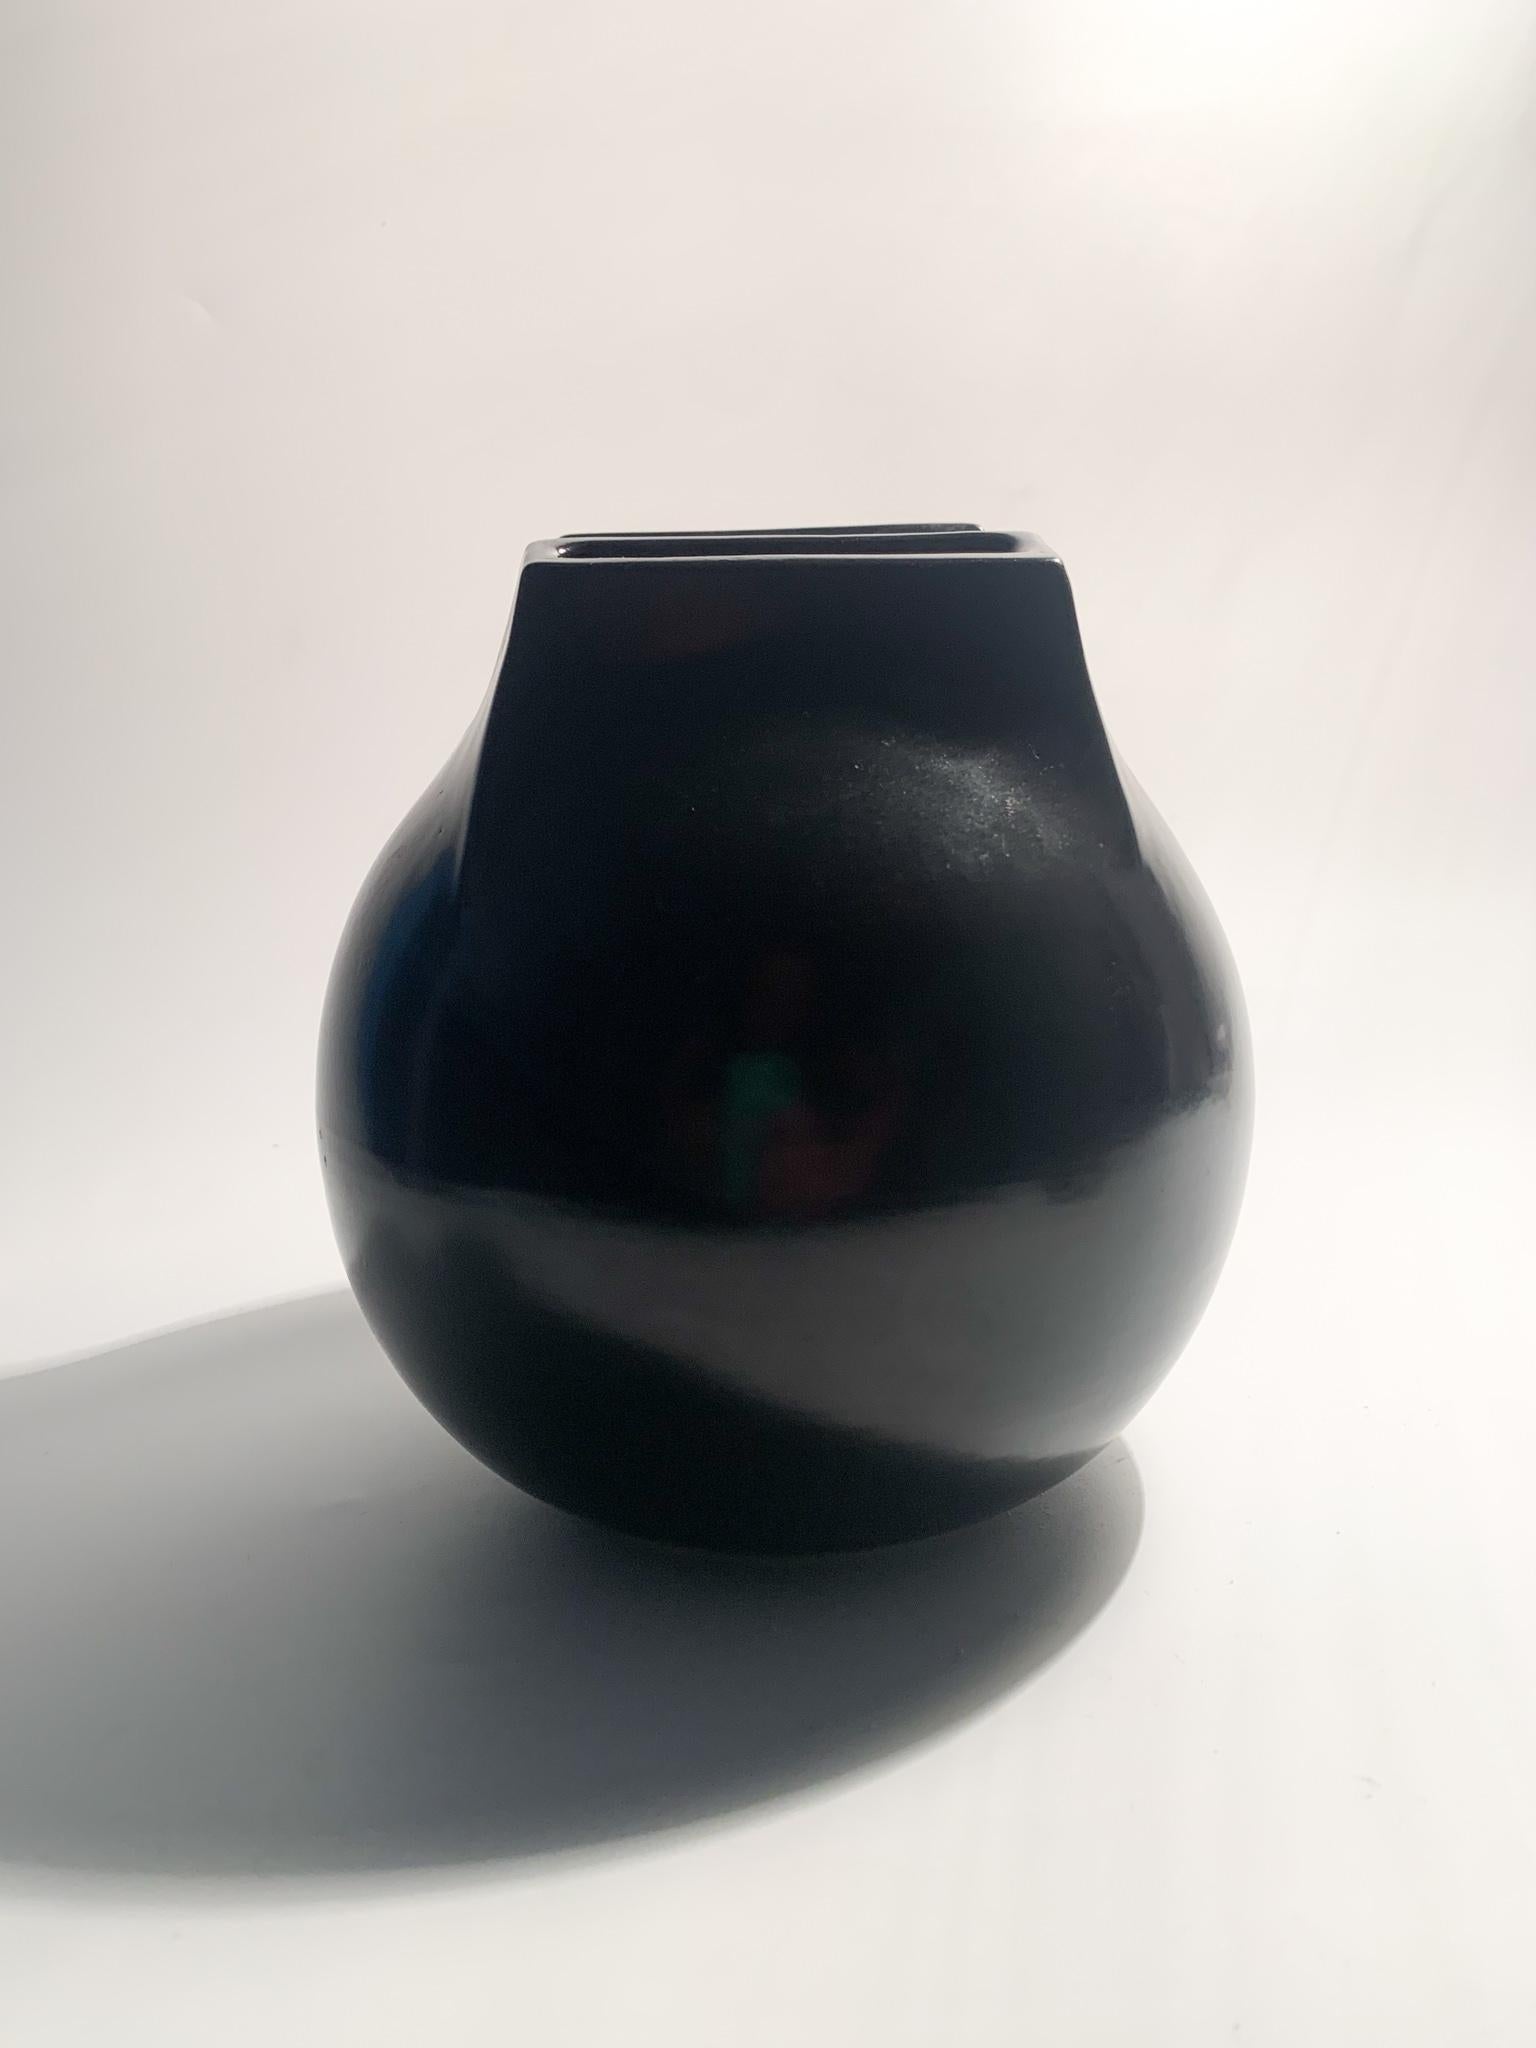 Italian Whistle Ceramic Vase with Double Mouth by Franco Bucci from the 1970s For Sale